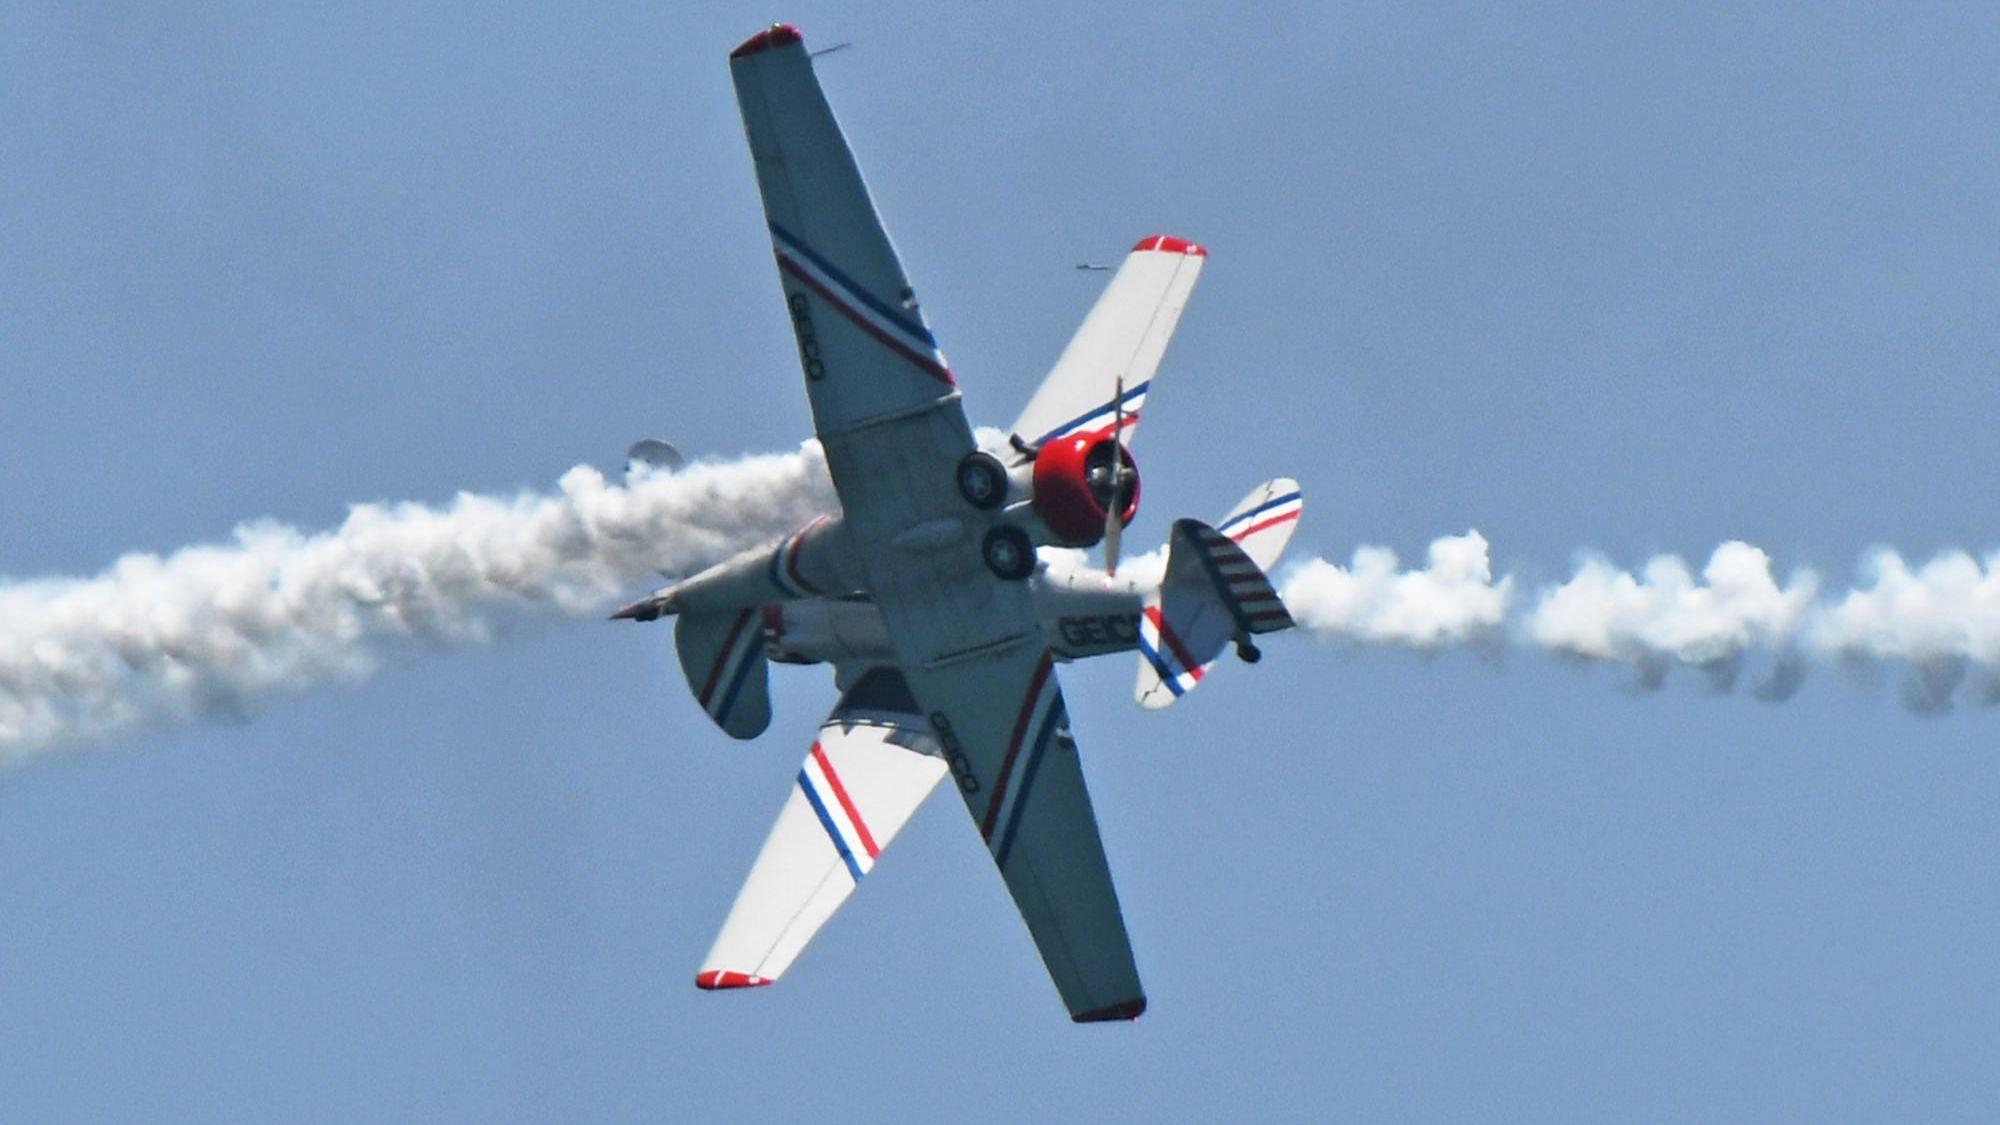 Fort Lauderdale Air Show 2018 Guide to highflying stunts, parking and